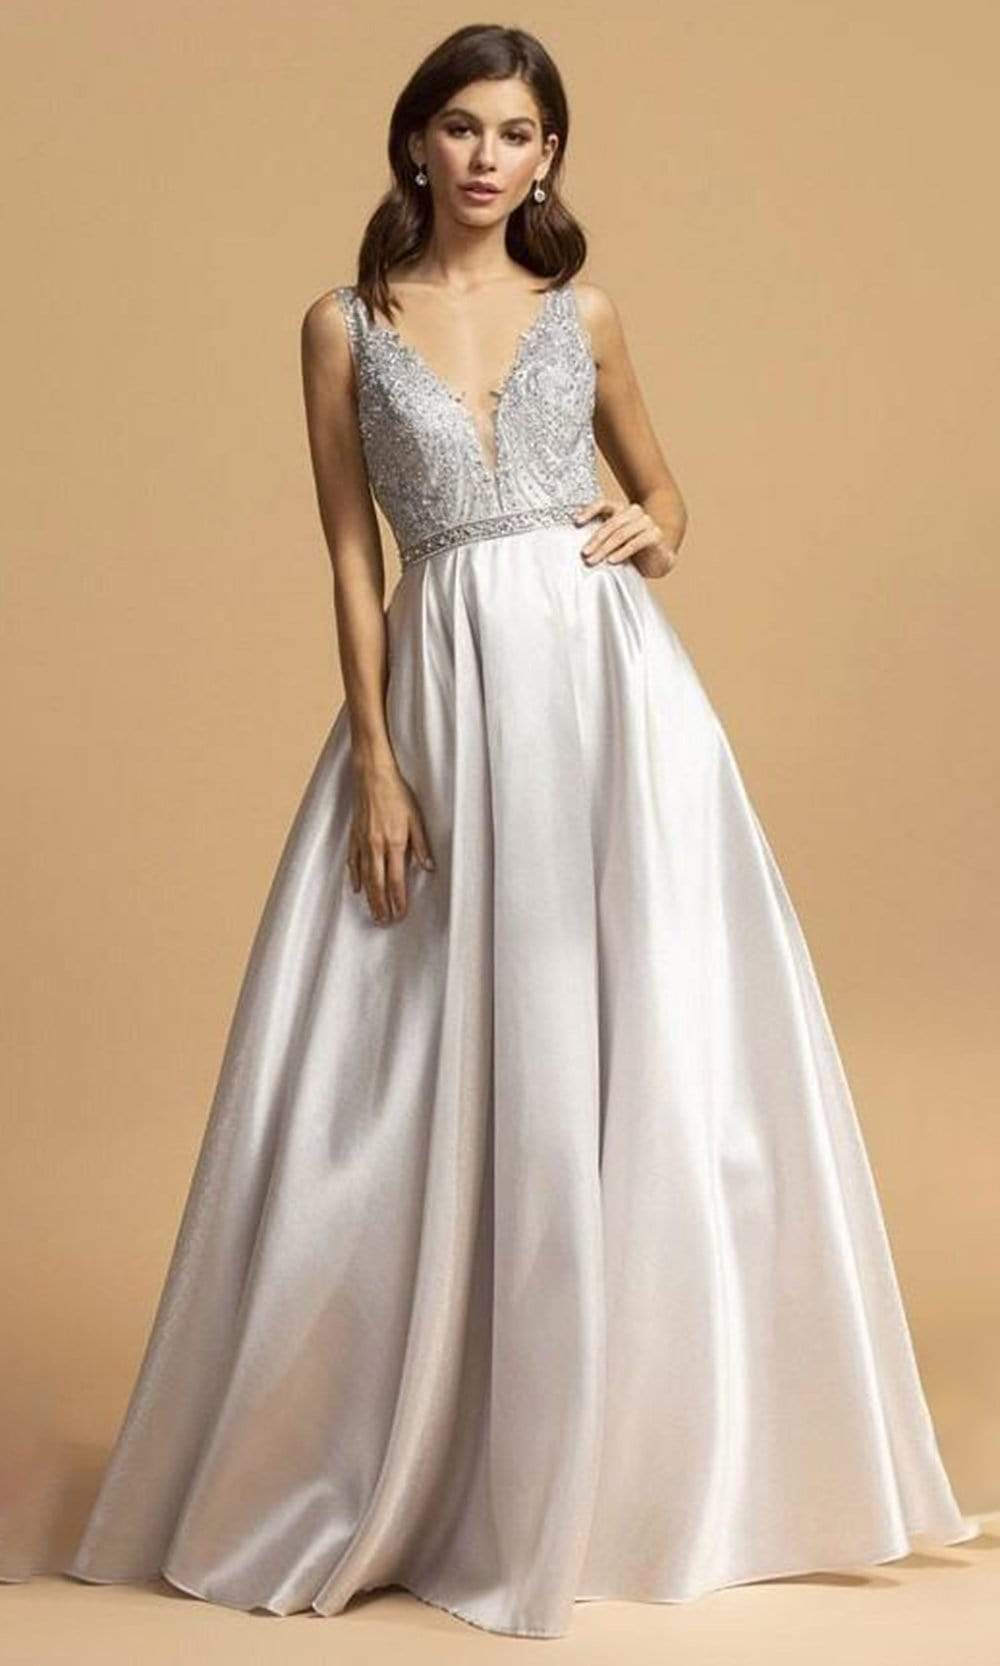 Tina Holly debutante satin gown Style #BB210W - Pearls & Roses Bridal